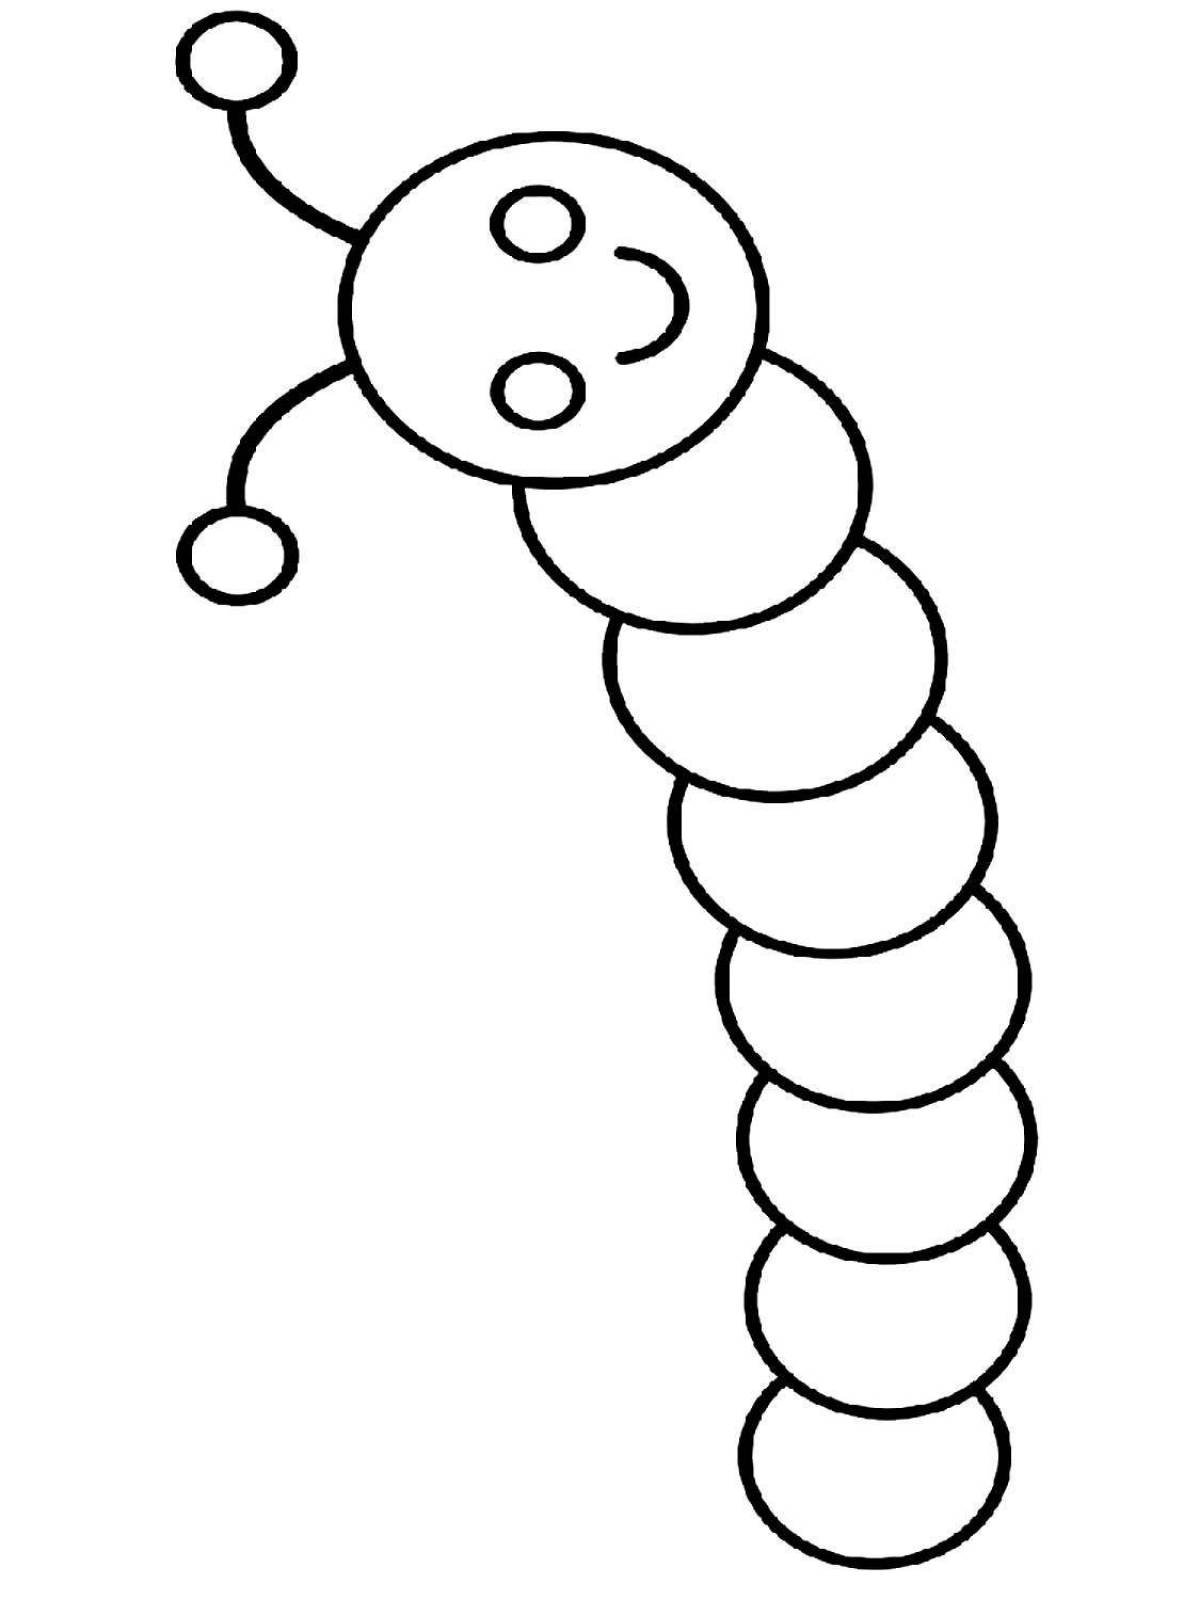 Attractive caterpillar coloring page